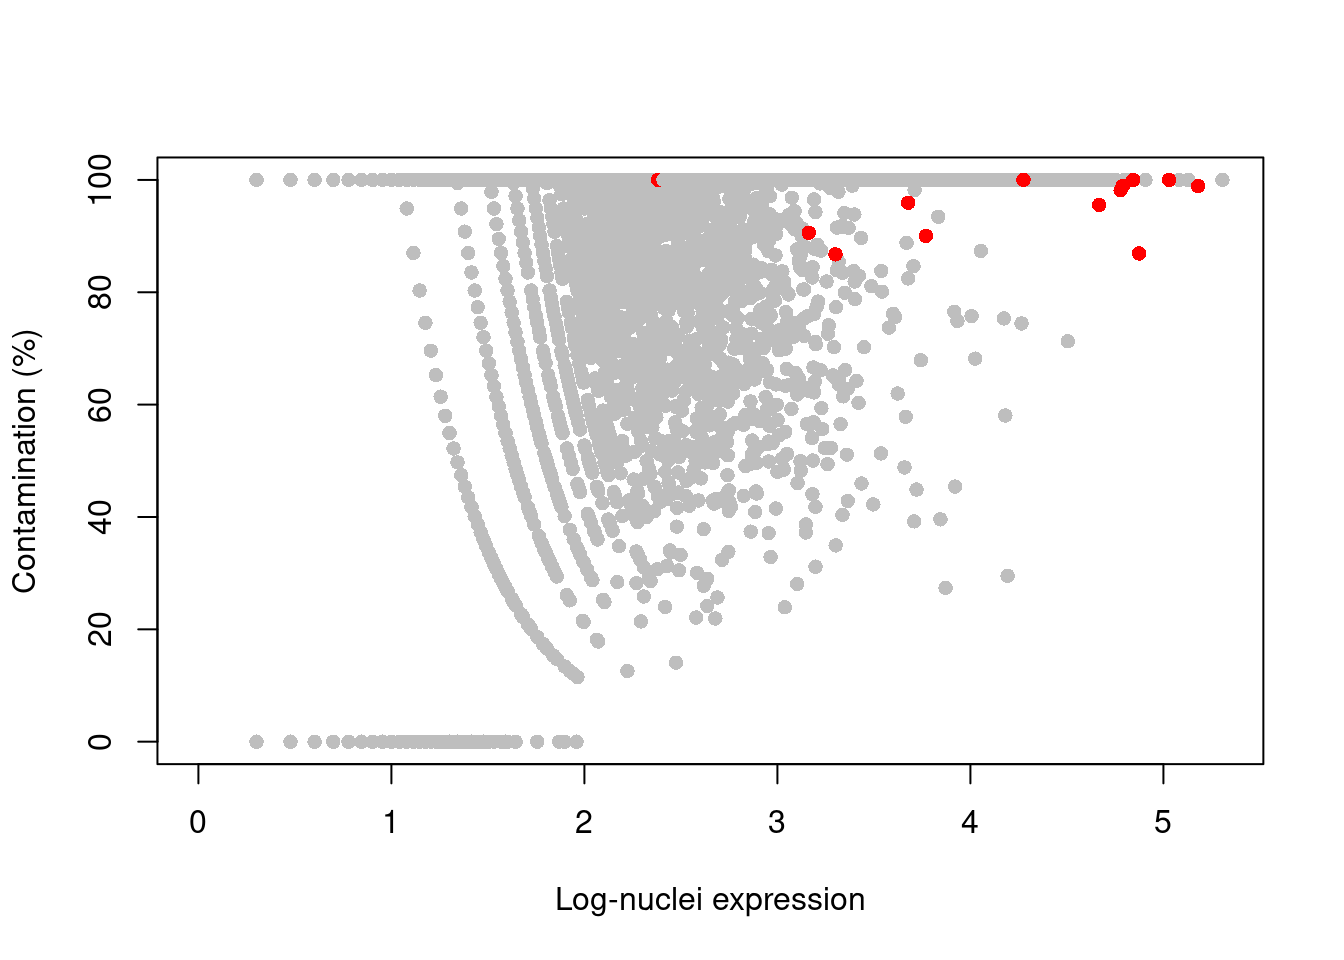 Percentage of counts in the nuclei of the 10X brain dataset that are attributed to contamination from the ambient solution. Each point represents a gene and mitochondrial genes are highlighted in red.